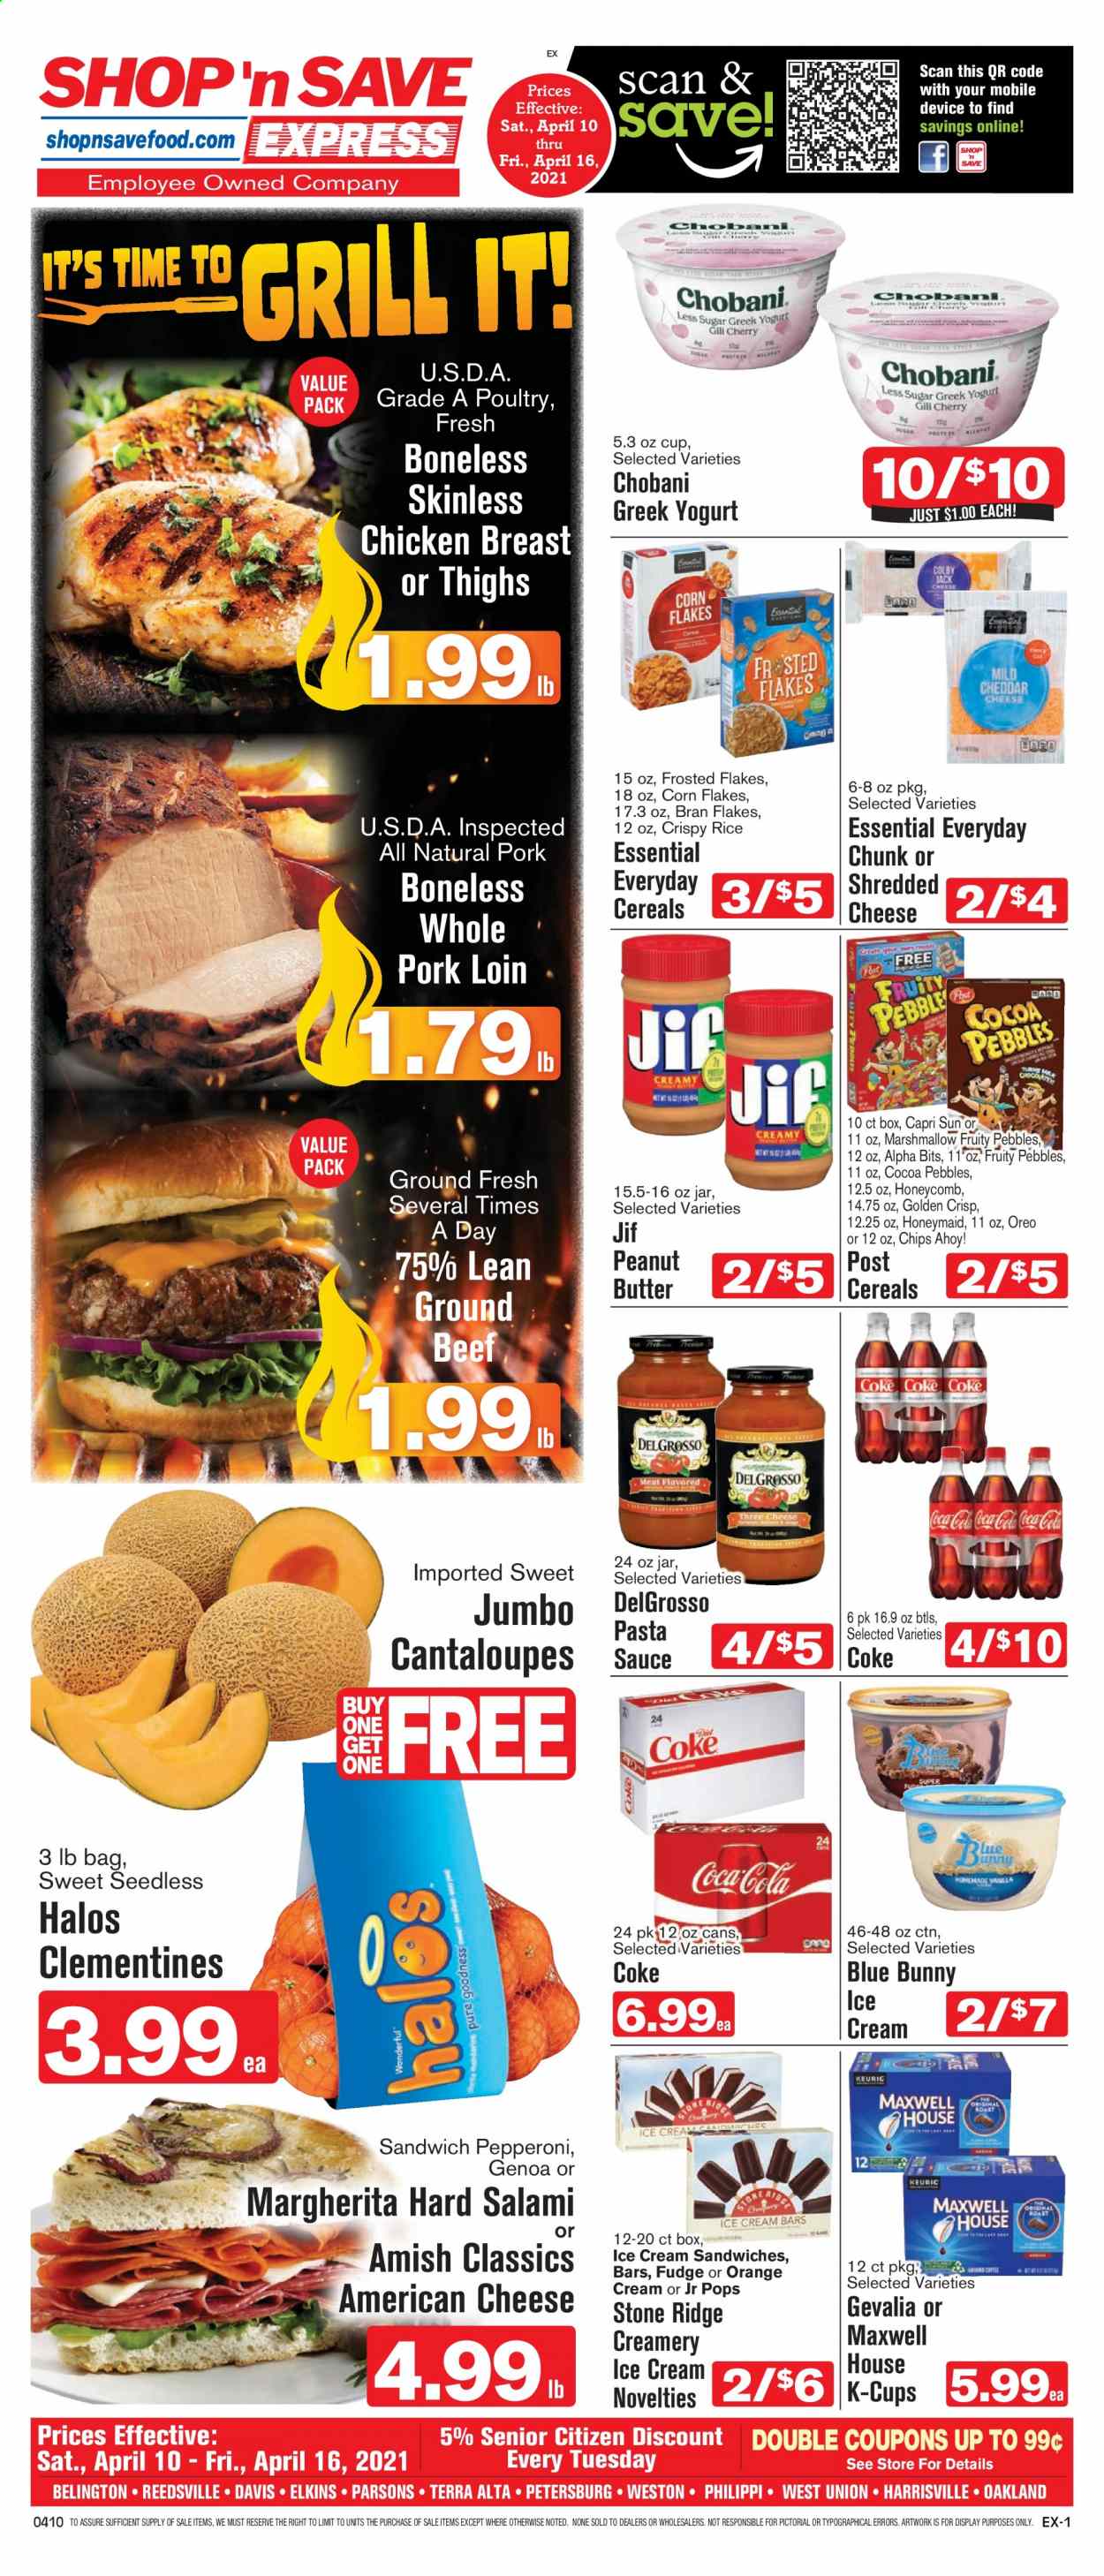 thumbnail - Shop ‘n Save Express Flyer - 04/10/2021 - 04/16/2021 - Sales products - cantaloupe, cherries, oranges, chicken breasts, pork loin, pork meat, sauce, salami, pepperoni, american cheese, Colby cheese, shredded cheese, greek yoghurt, yoghurt, Chobani, ice cream, ice cream bars, ice cream sandwich, Blue Bunny, fudge, marshmallows, Chips Ahoy!, chips, cocoa, cereals, corn flakes, bran flakes, Frosted Flakes, Fruity Pebbles, pasta, peanut butter, Jif, Capri Sun, Coca-Cola, Maxwell House, coffee capsules, K-Cups, Gevalia, clementines. Page 1.